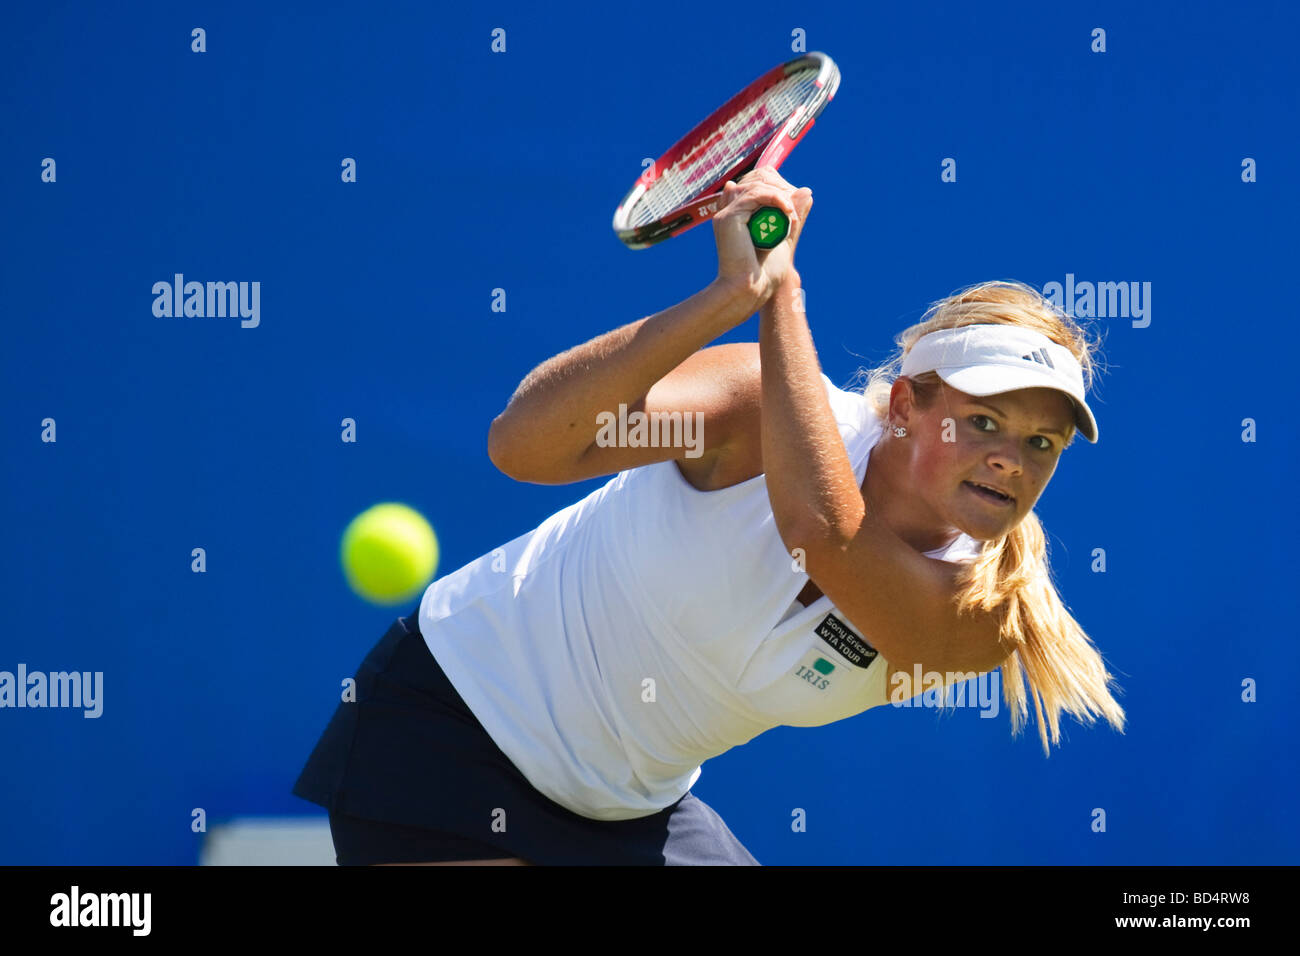 Aleksandra Wozniak in action playing double handed back hand during match. Stock Photo